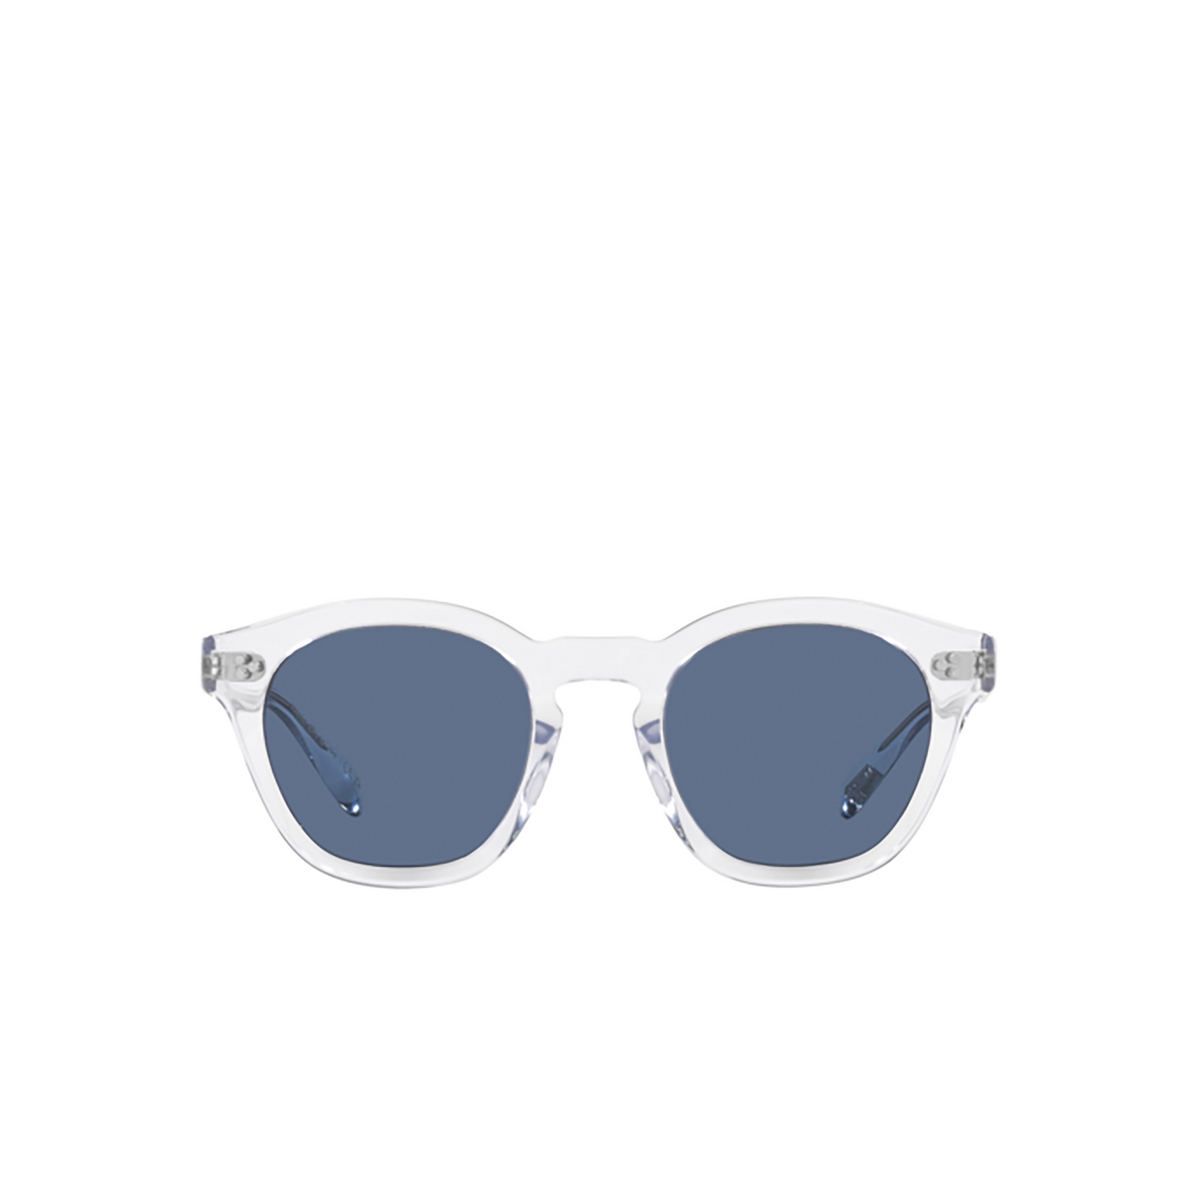 Oliver Peoples BOUDREAU L.A Sunglasses 110180 Crystal - 1/4